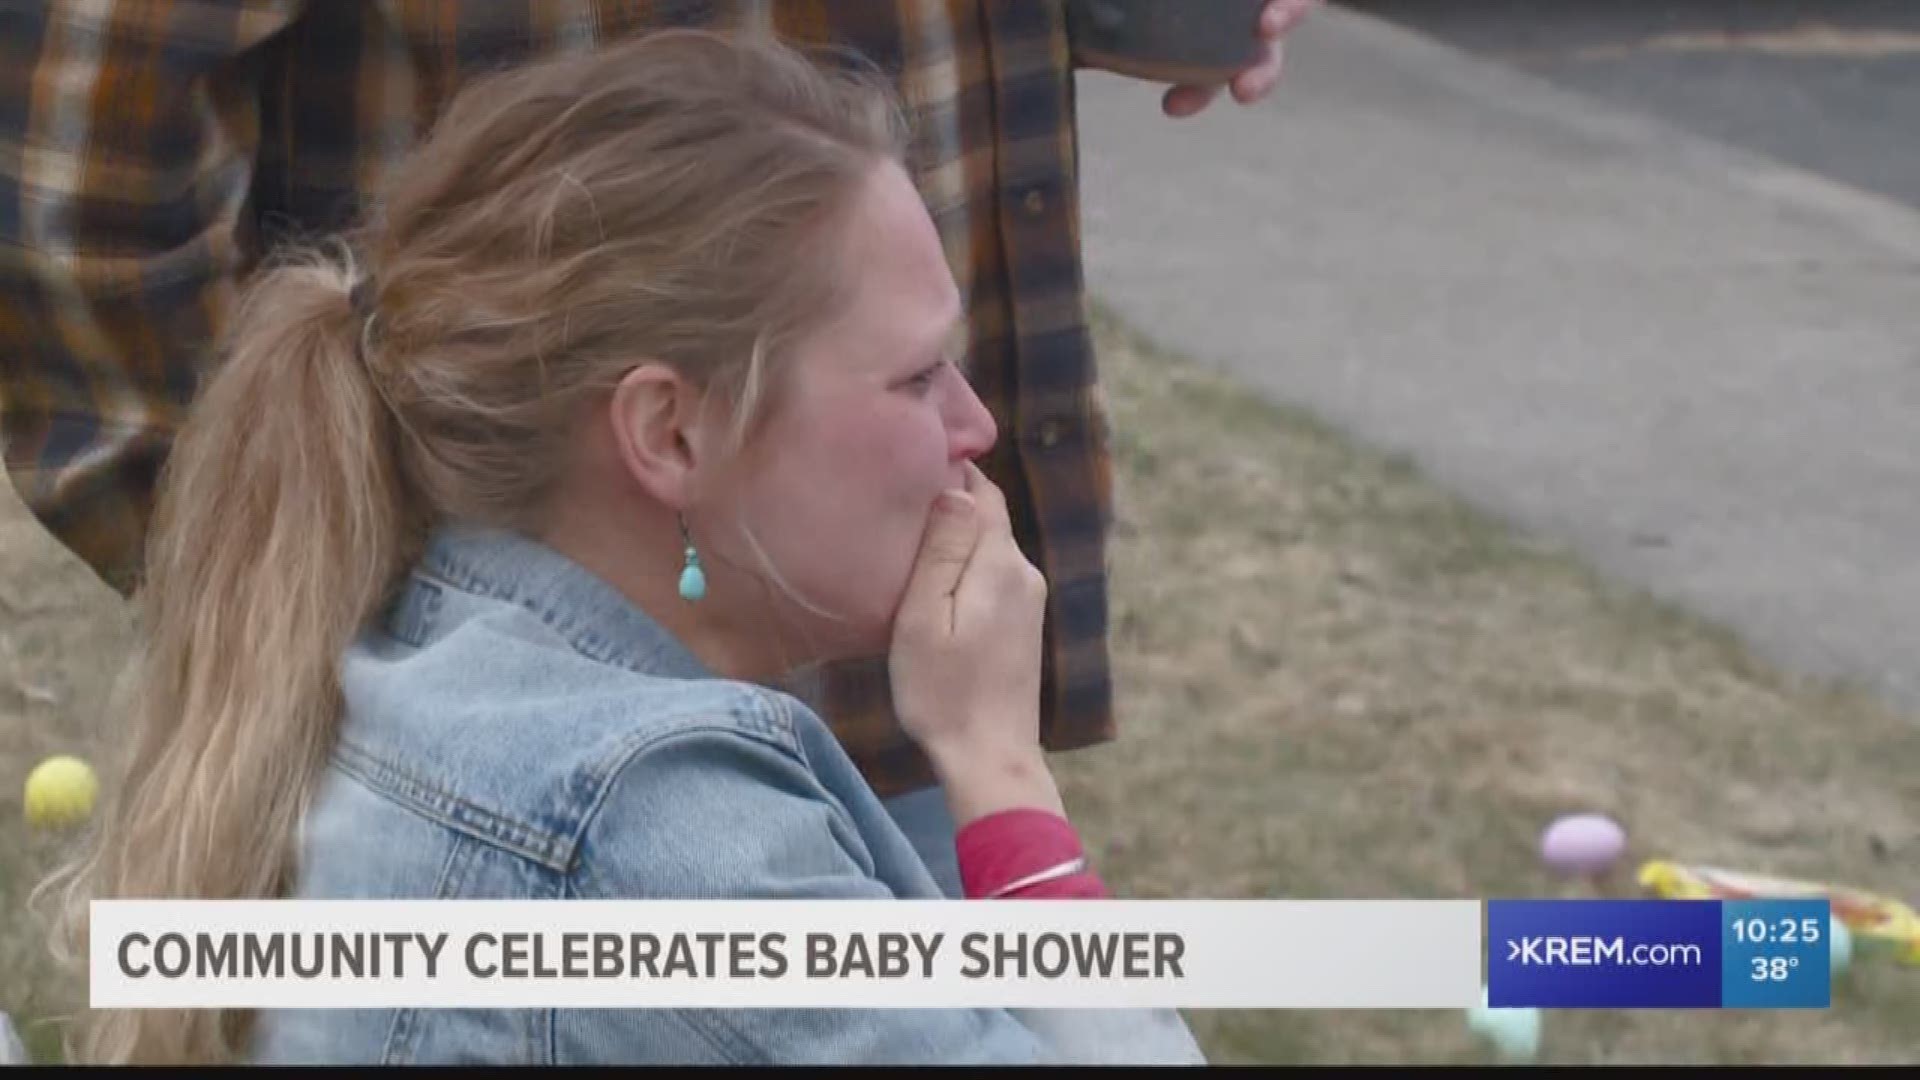 Margaret Greenfield and her family were only expecting about 40 people to show up to her baby shower, then one family member decided to bring the shower to her.